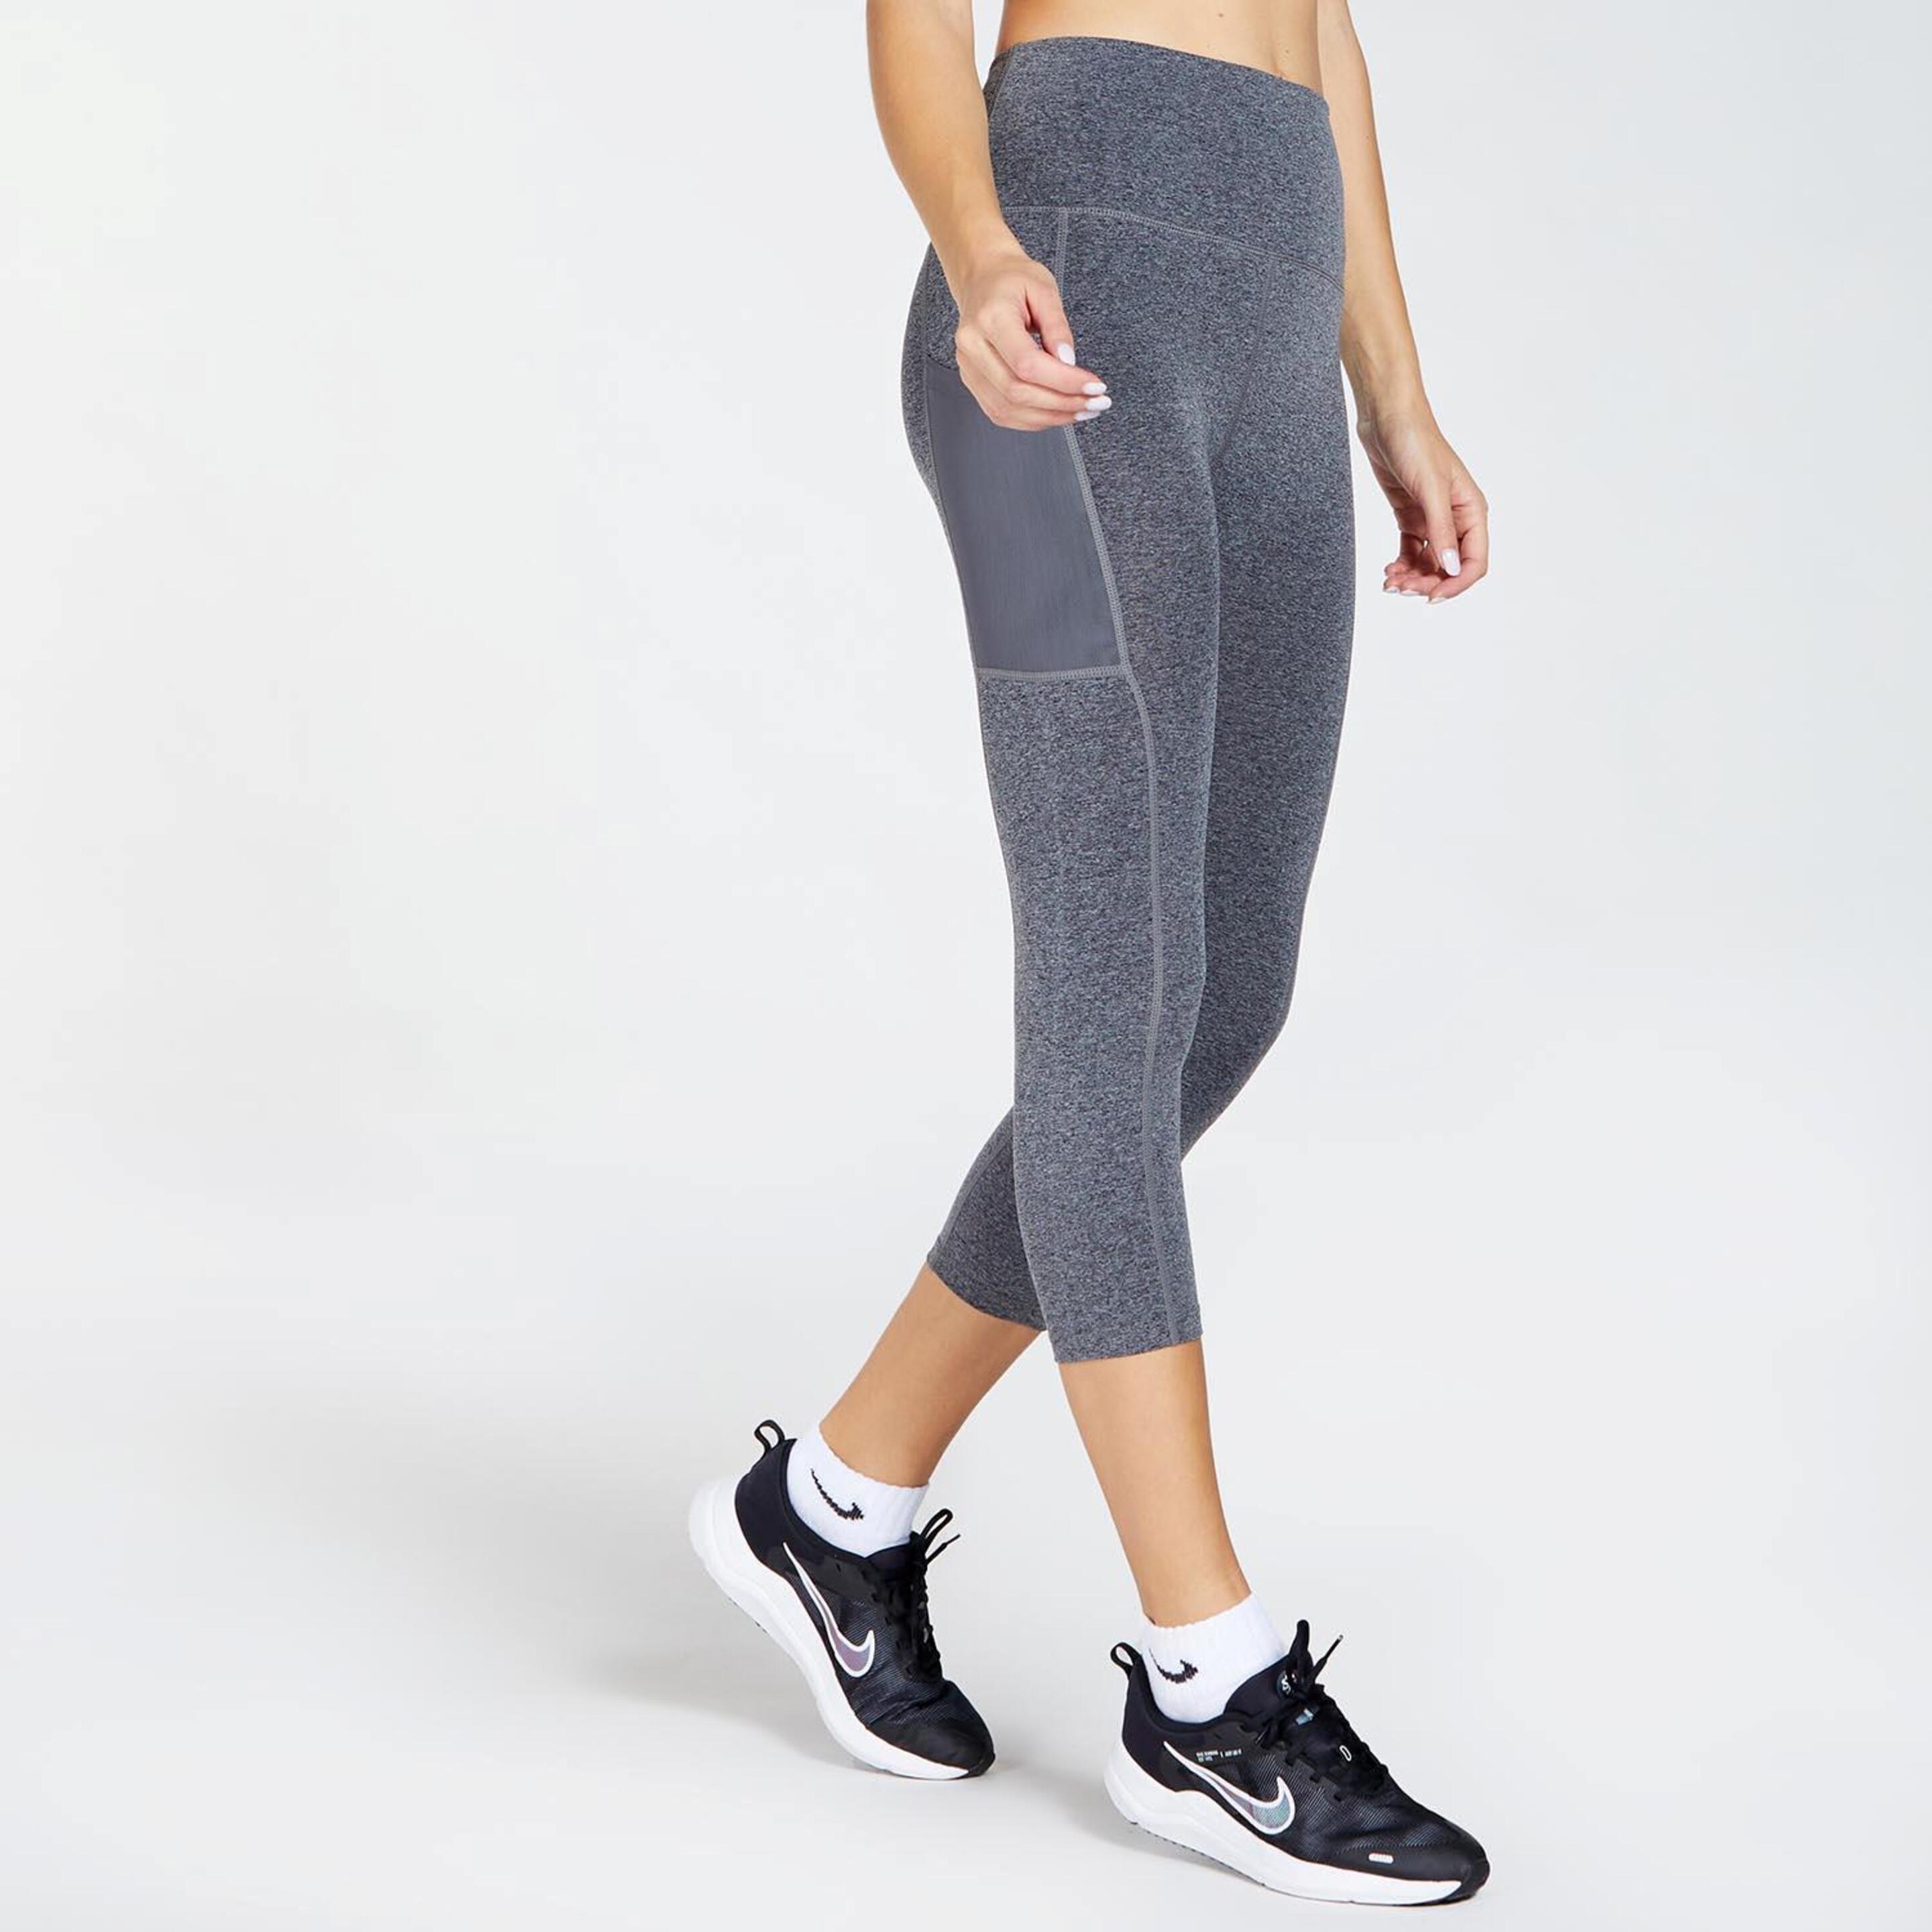 Doone Supportive - Gris - Mallas Fitness Mujer